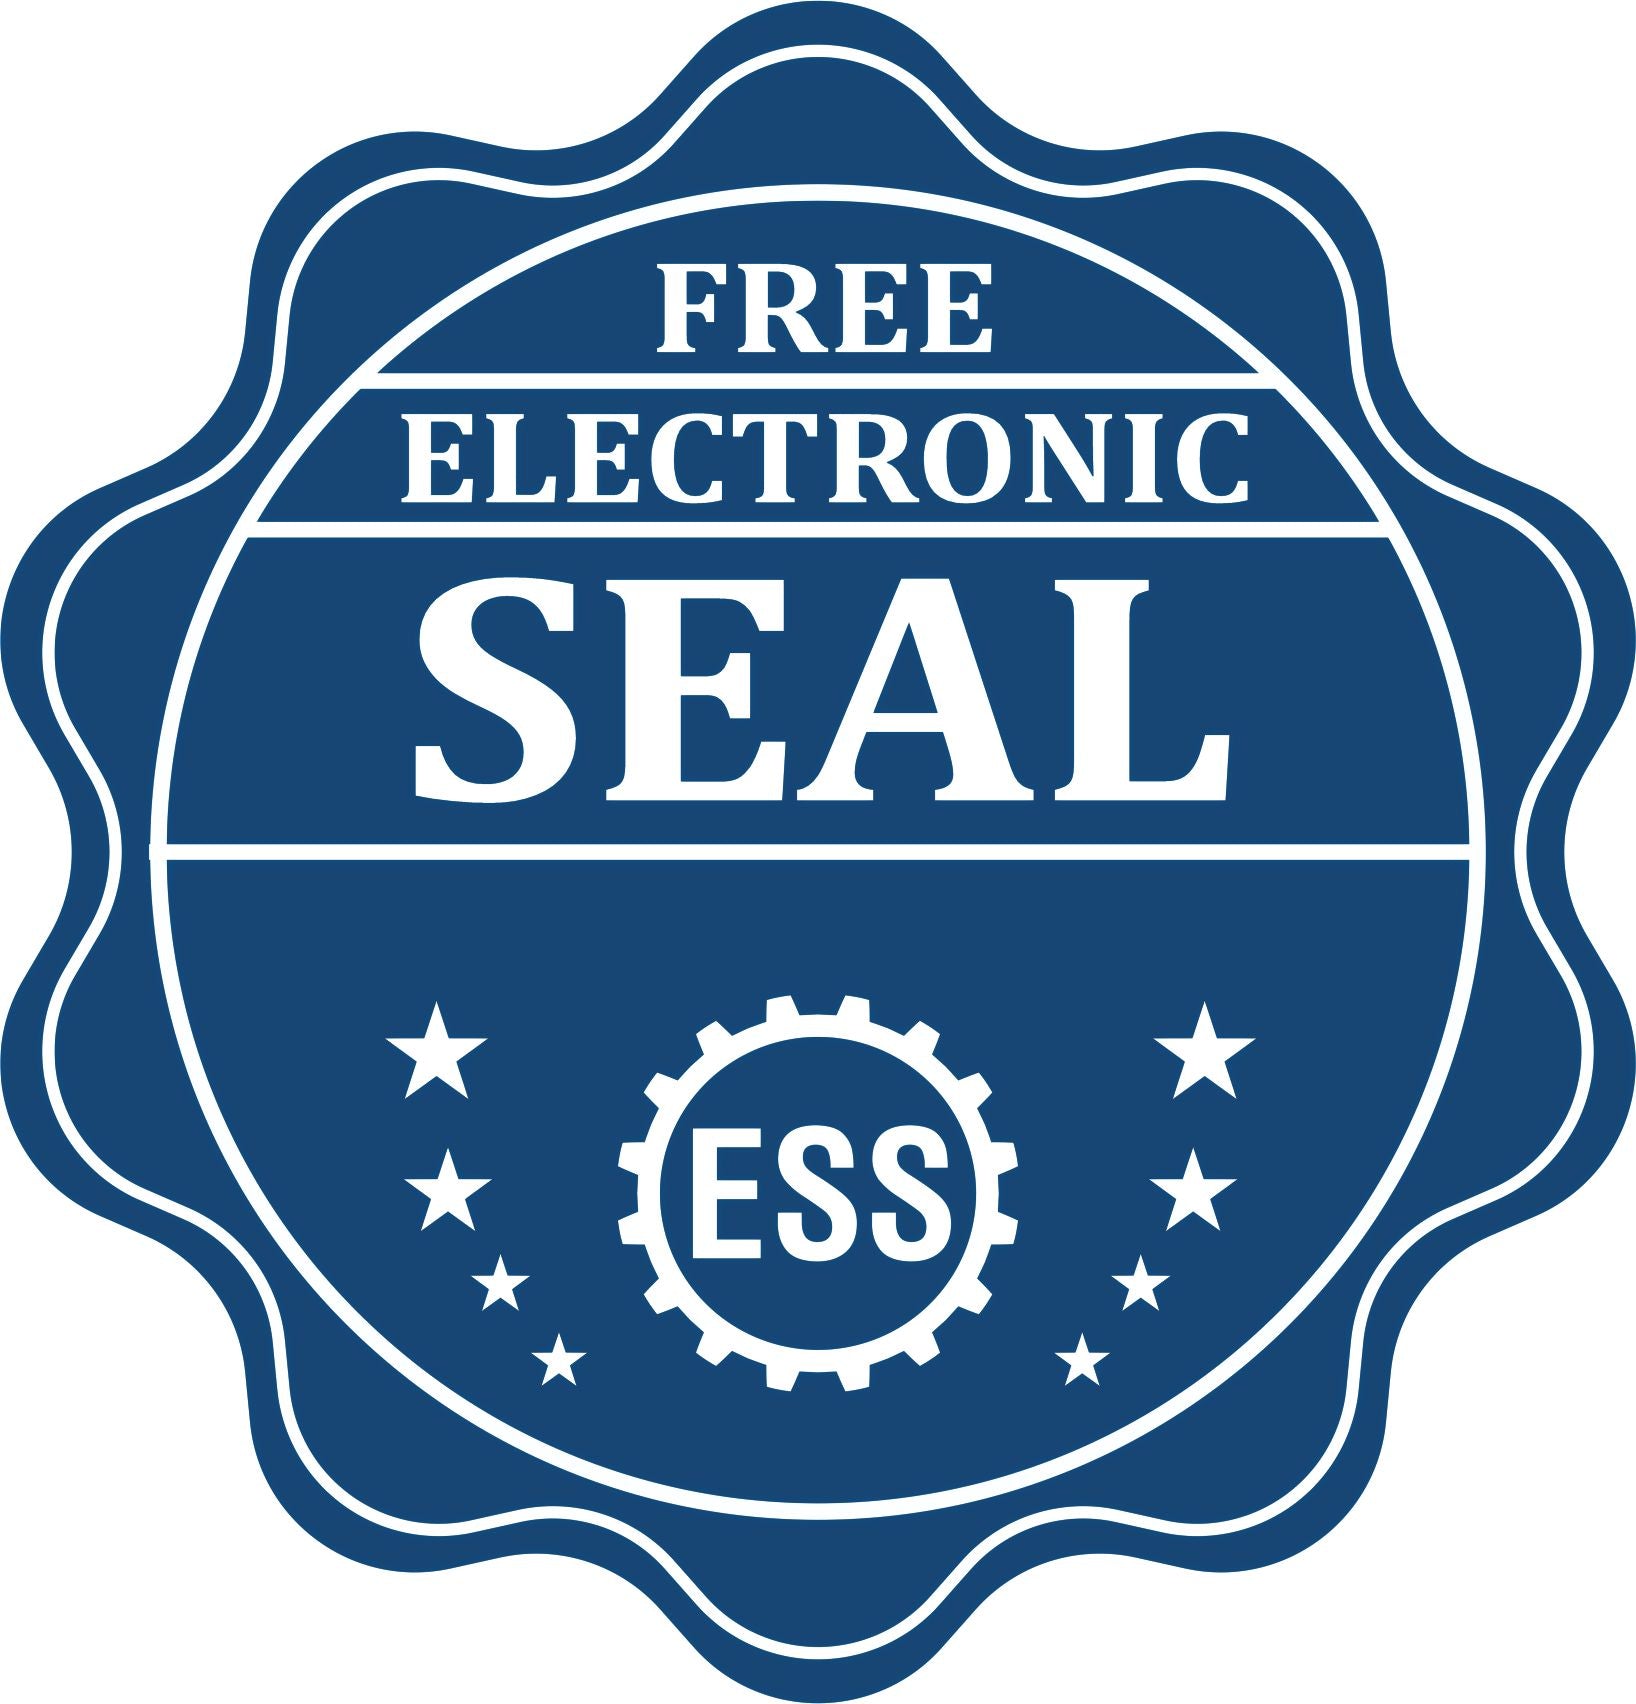 A badge showing a free electronic seal for the Missouri Engineer Desk Seal with stars and the ESS gear on the emblem.